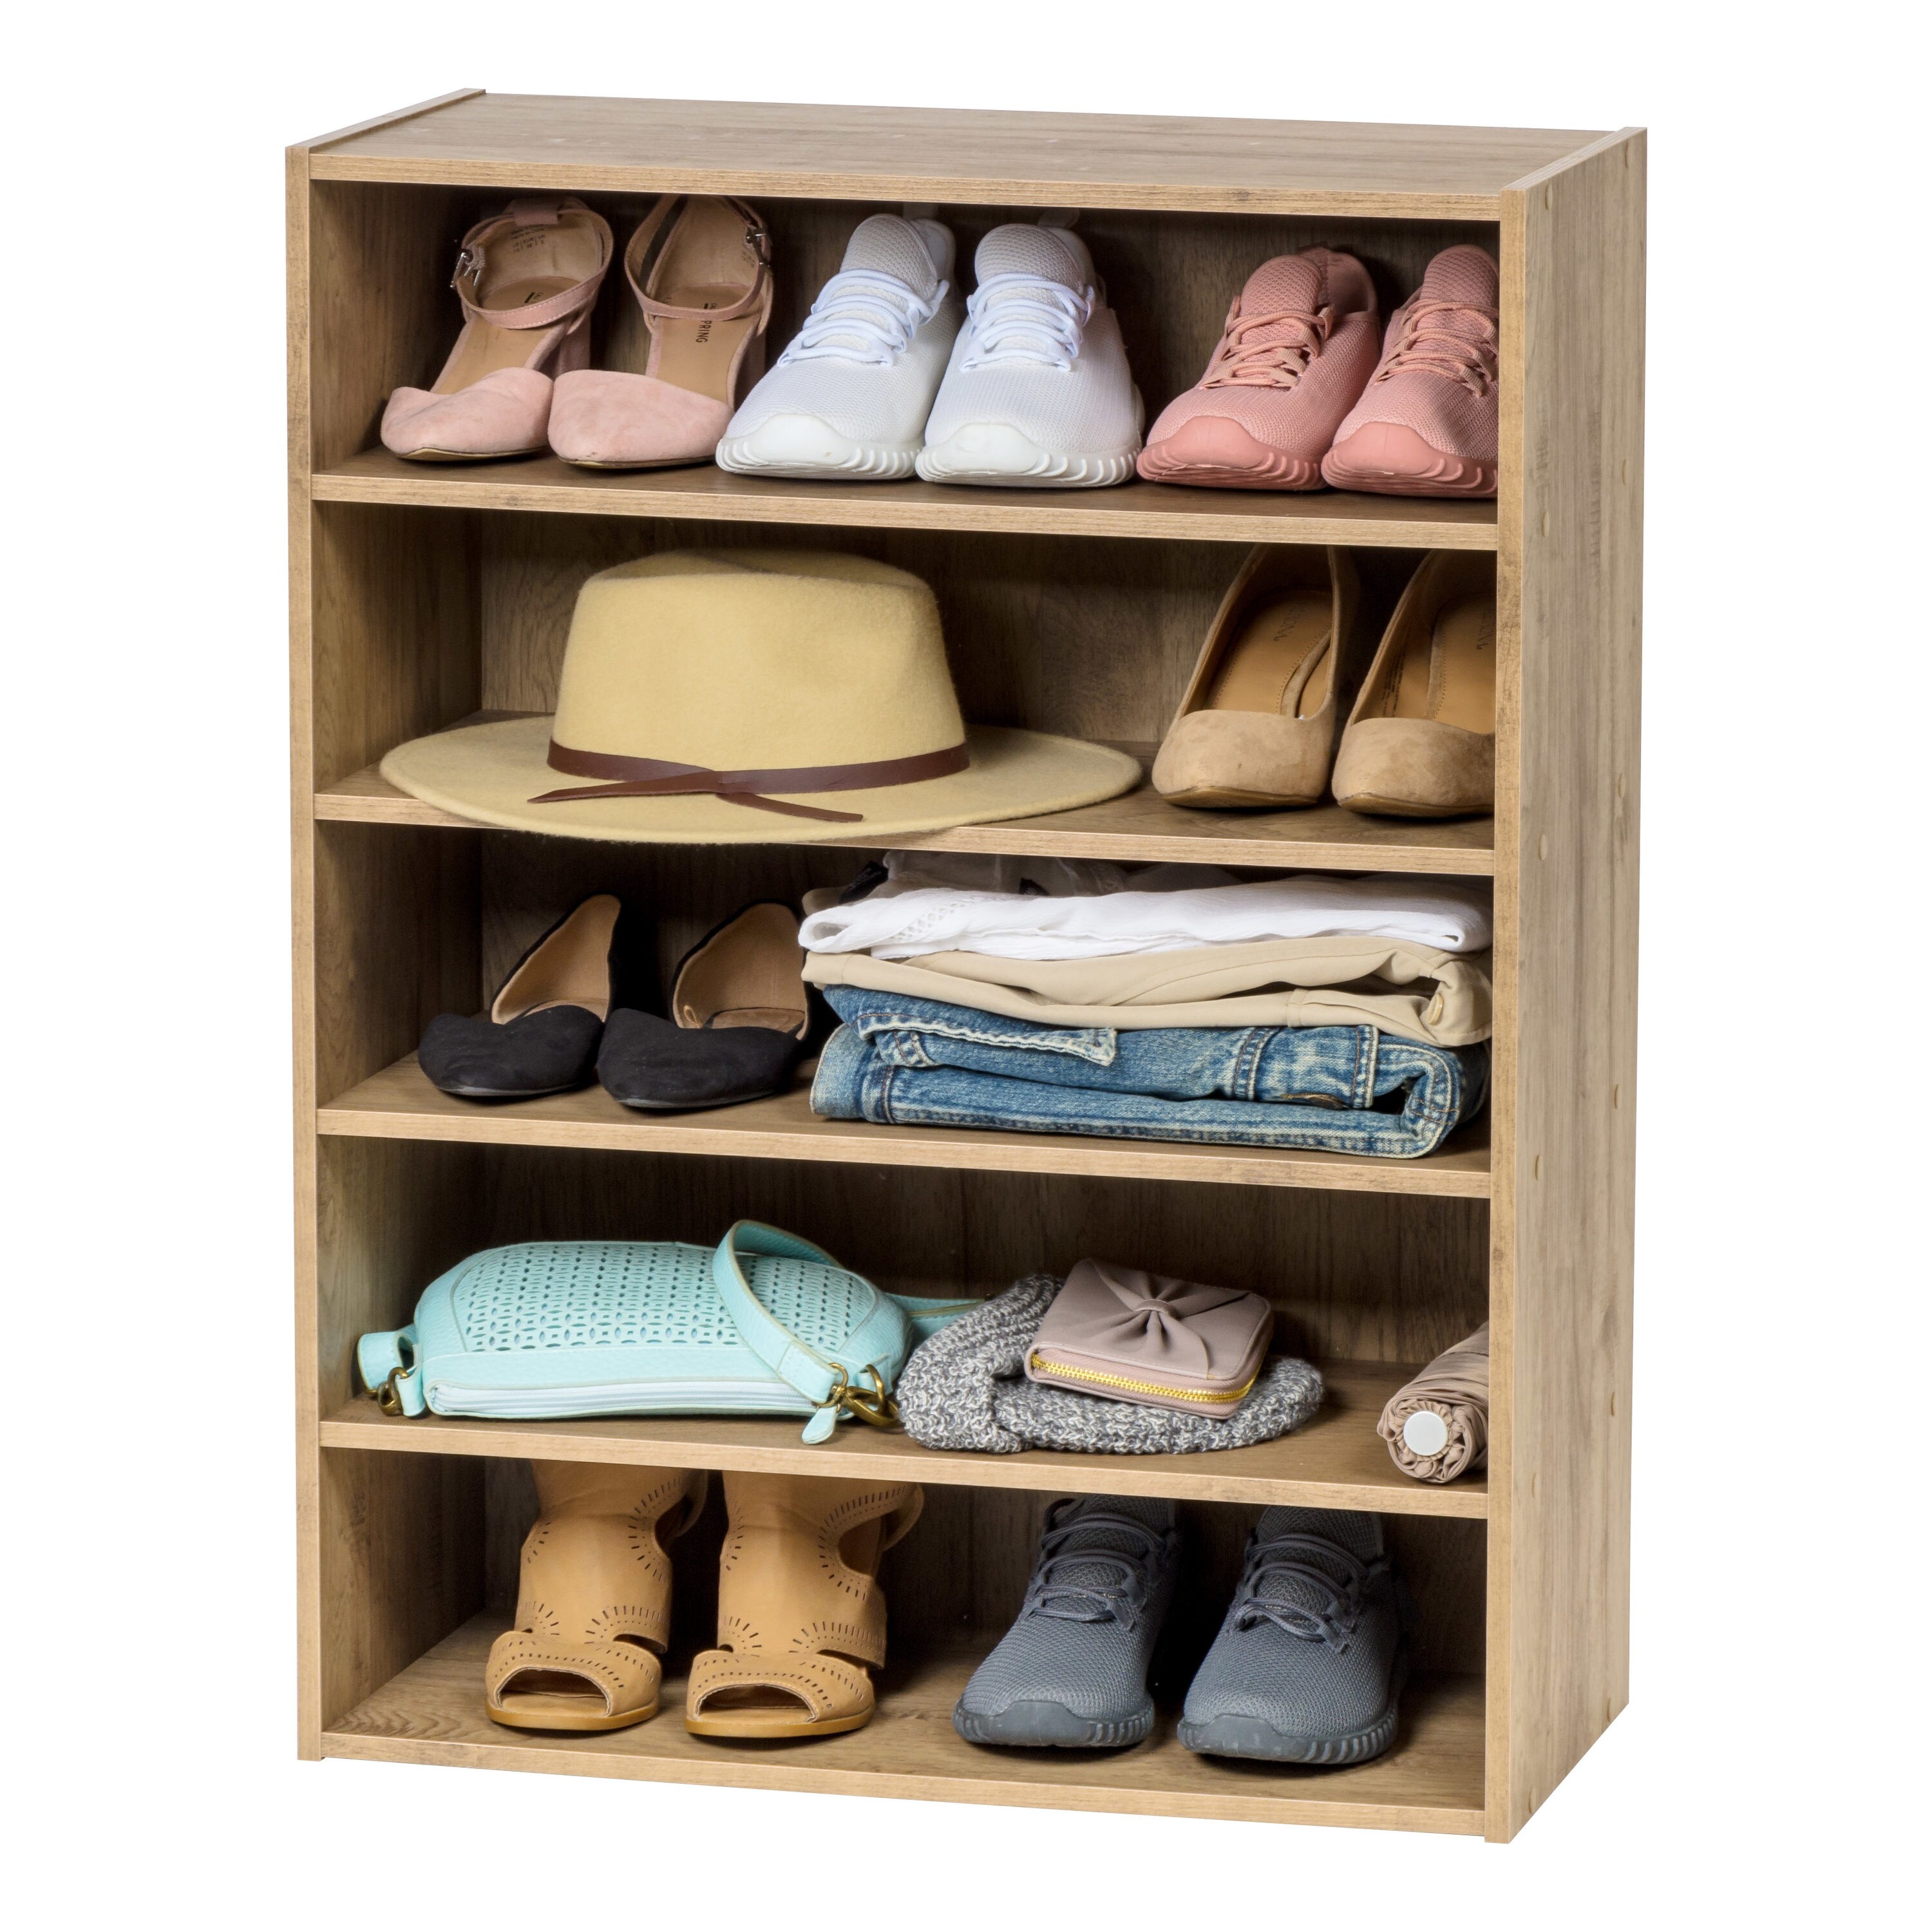 14 of the Best Shoe Organizers on the Market